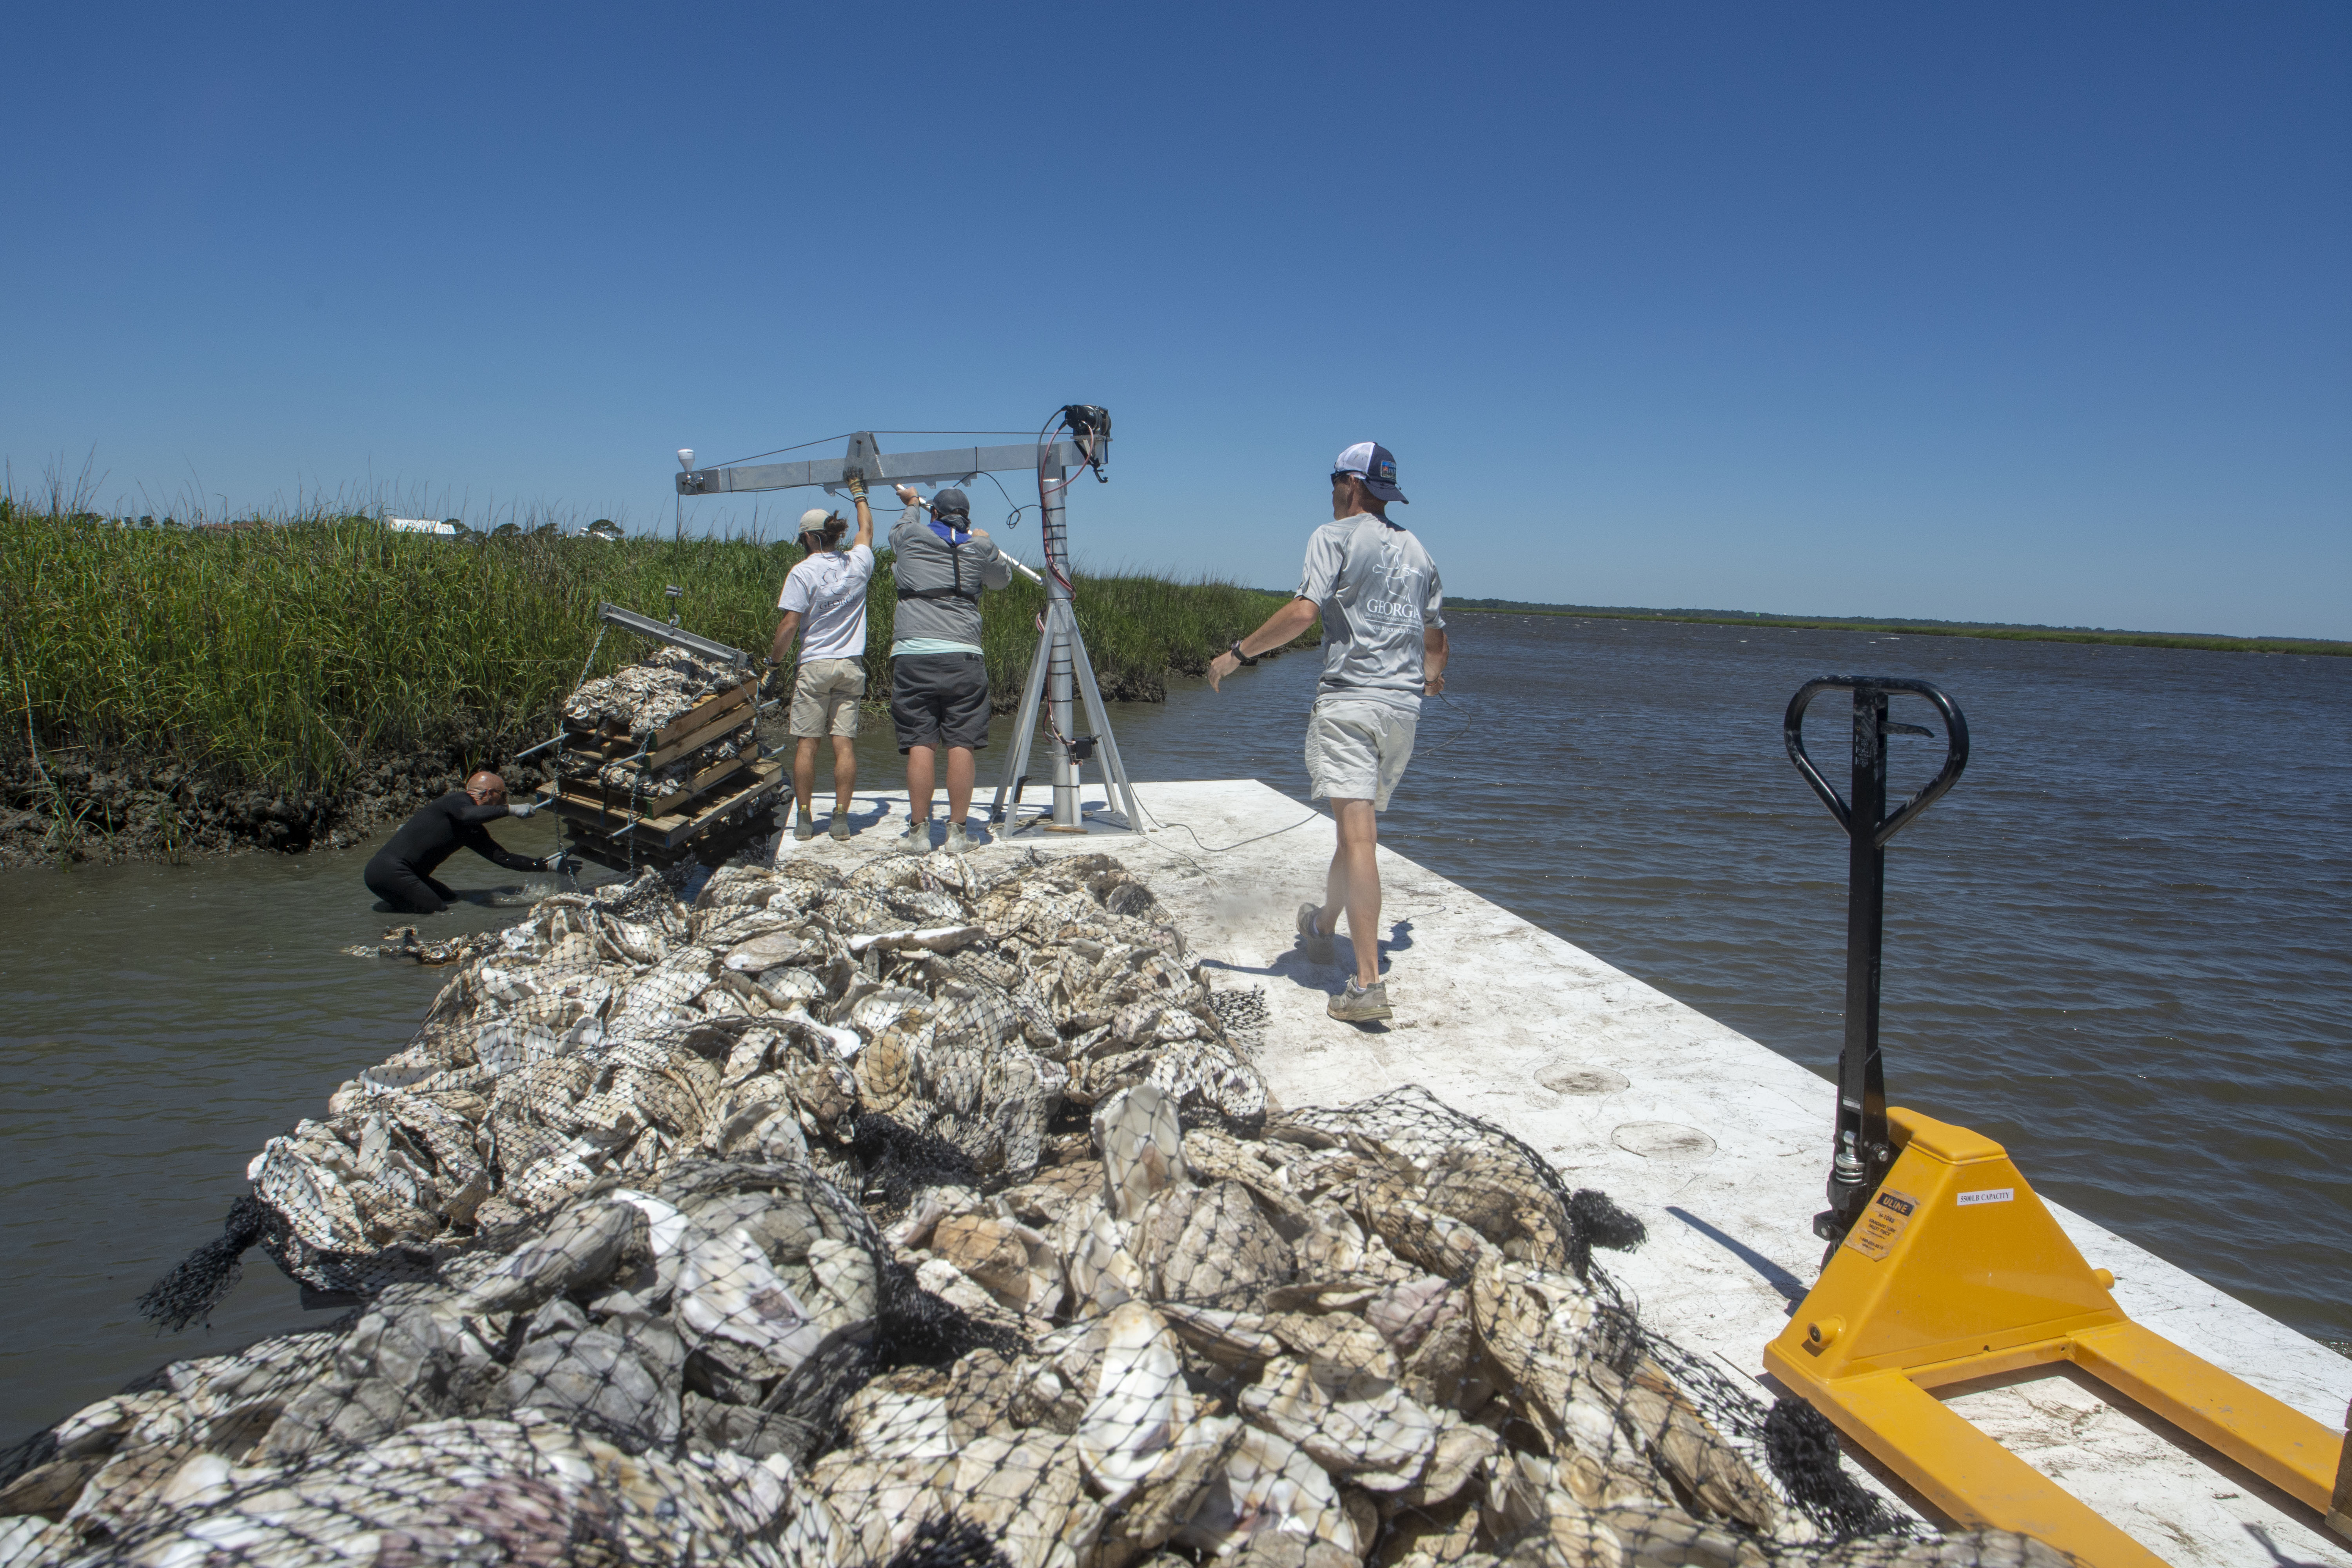 Staff with the Coastal Resources Division (CRD) of the Georgia Department of Natural Resources place recycled oyster shell on the banks of the Back River on Friday, May 1, 2020. CRD staff recently completed the first phase of a major oyster bed restoration project, placing 3,700 bags of recycled oyster shells on the west bank of the Back River.